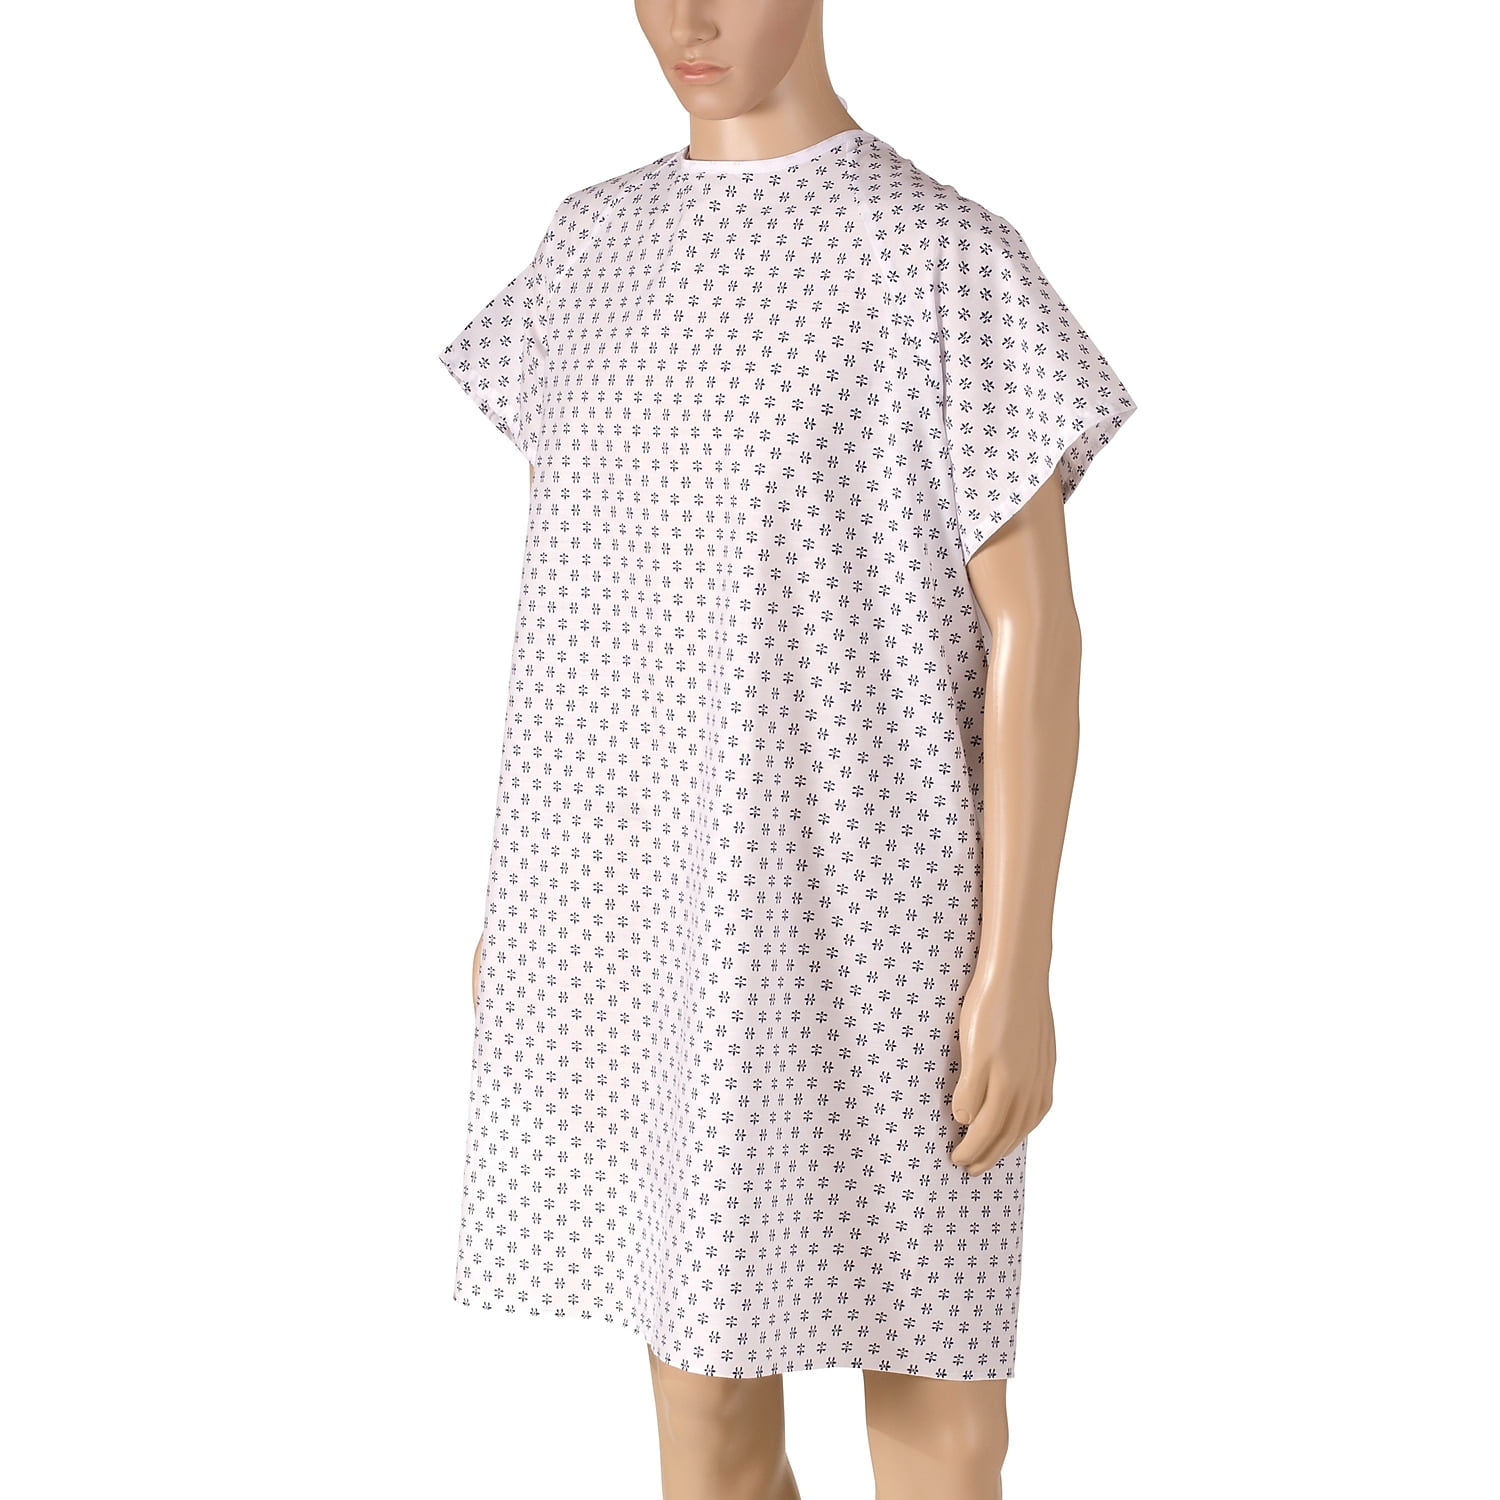 DMI Convalescent Hospital Gown with Back Tie Machine Washable Print a9d178a7 6eb5 4b2b 946e 204b2fe97301.2bcd25a43fa6c0aebb69b2a4f378f3c1